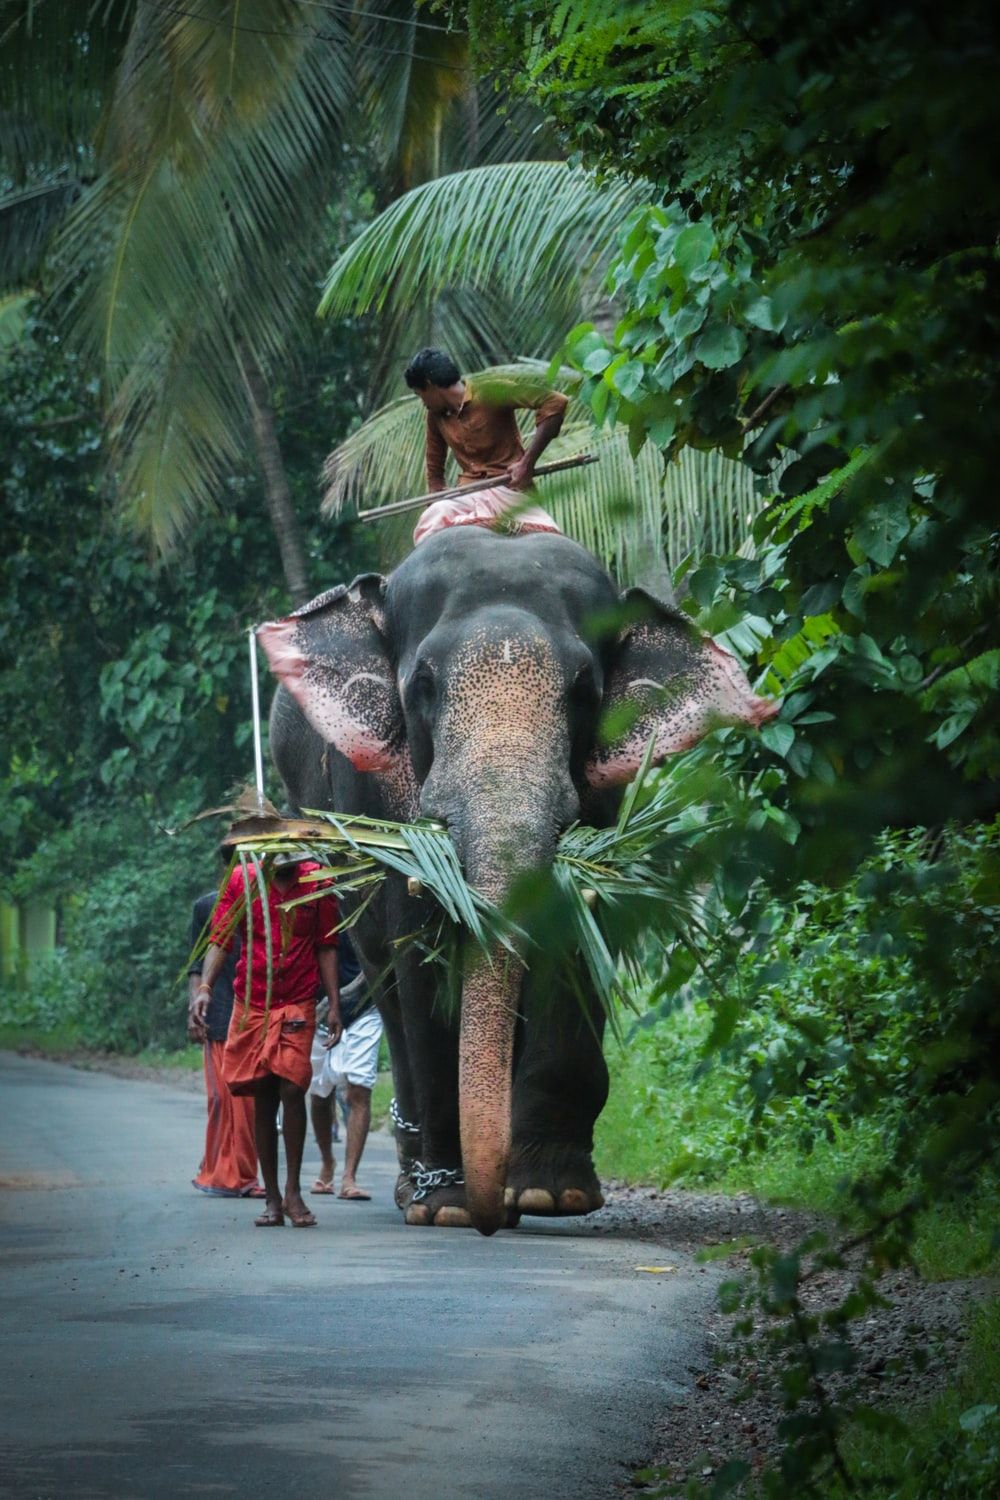 Kerala Elephant Picture. Download Free Image